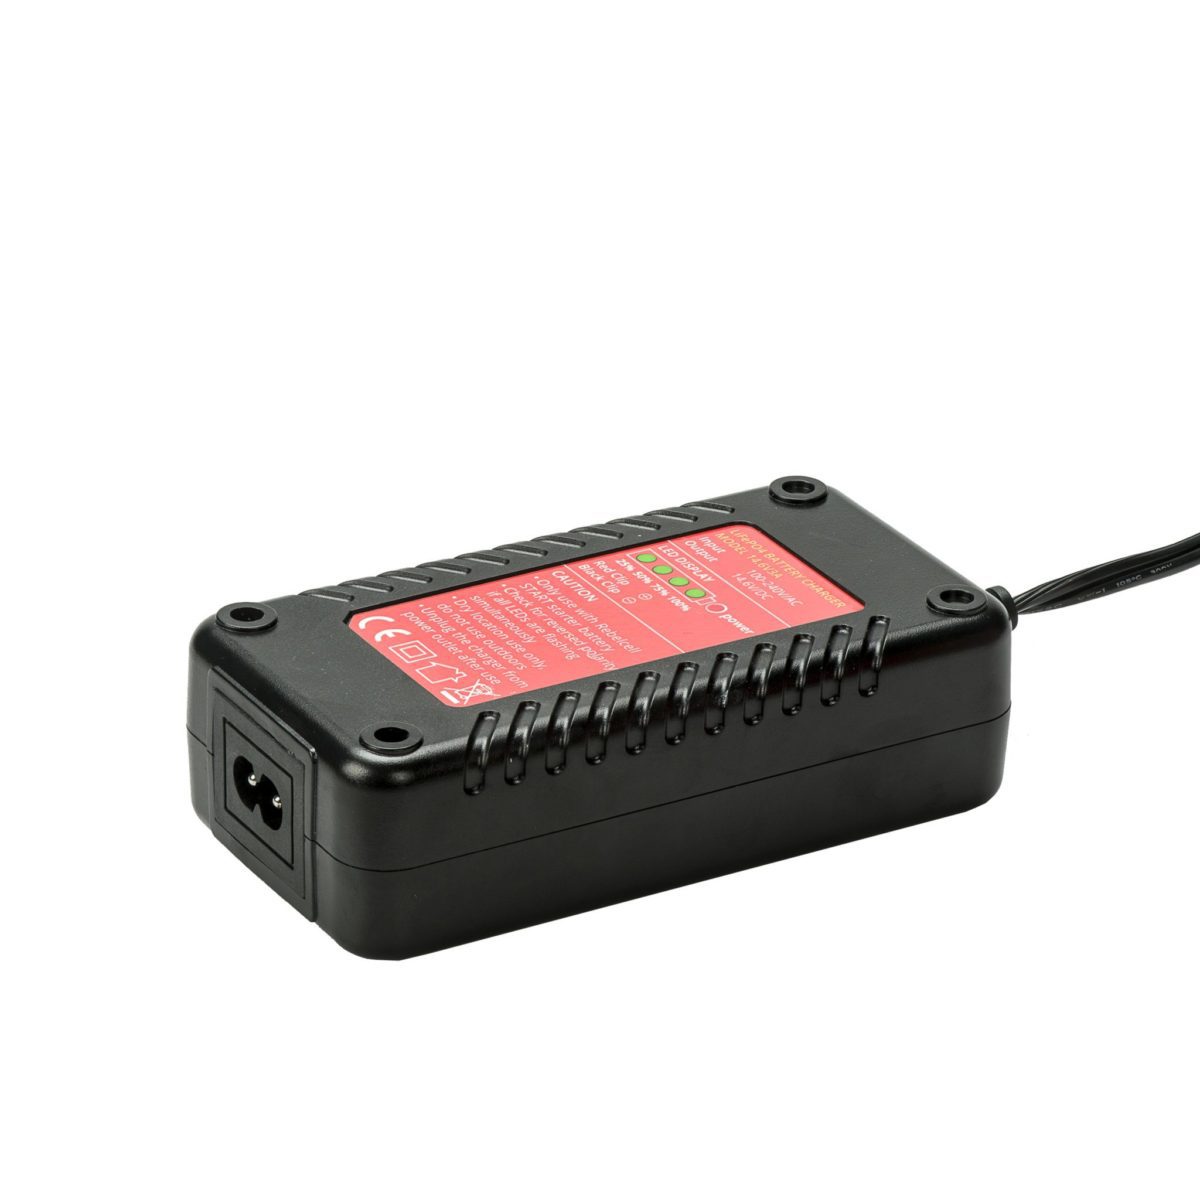 Rebelcell charger 14.6V3A product image